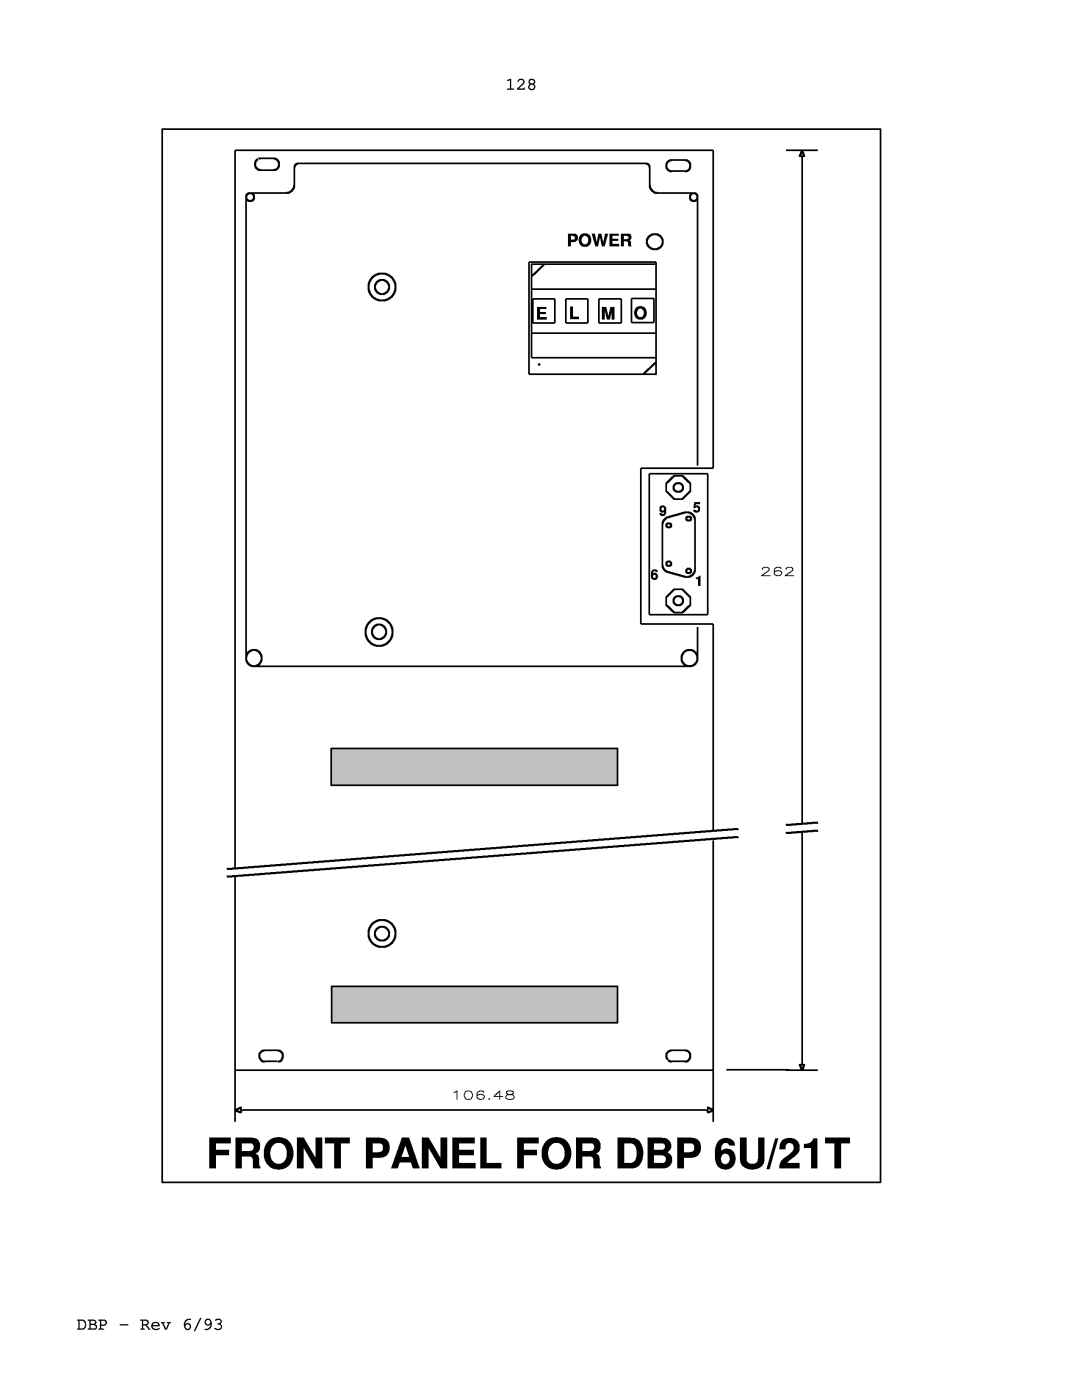 Elmo DBP SERIES manual FRONT PANEL FOR DBP 6U/21T, Power, E L M 